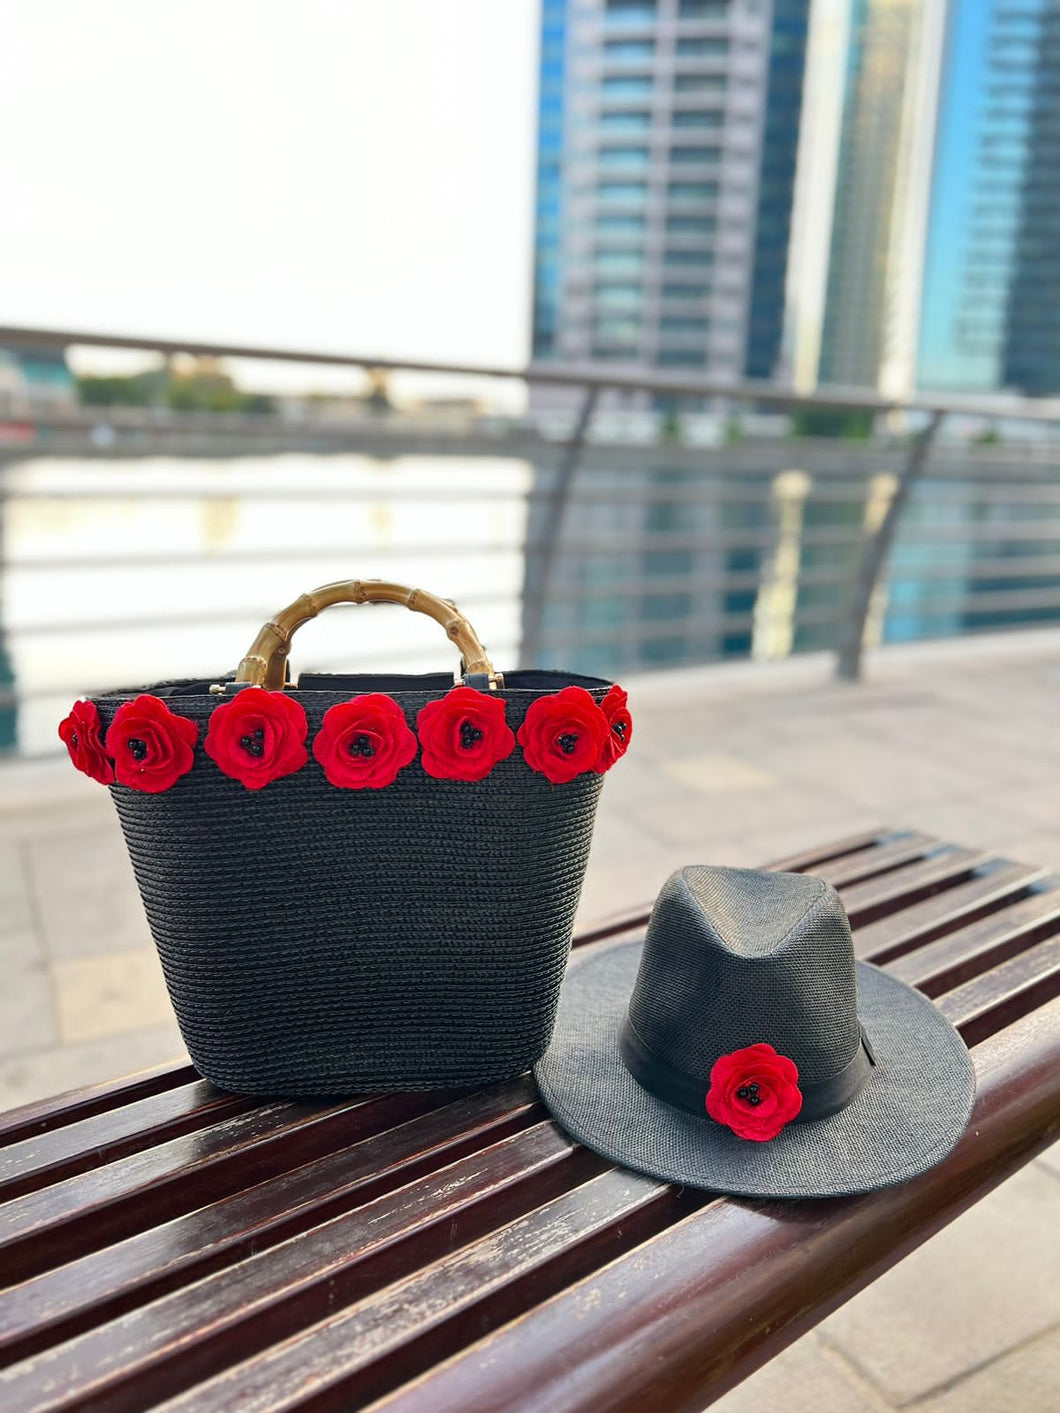 Bamboo Handle Black basket with red flowers and hat